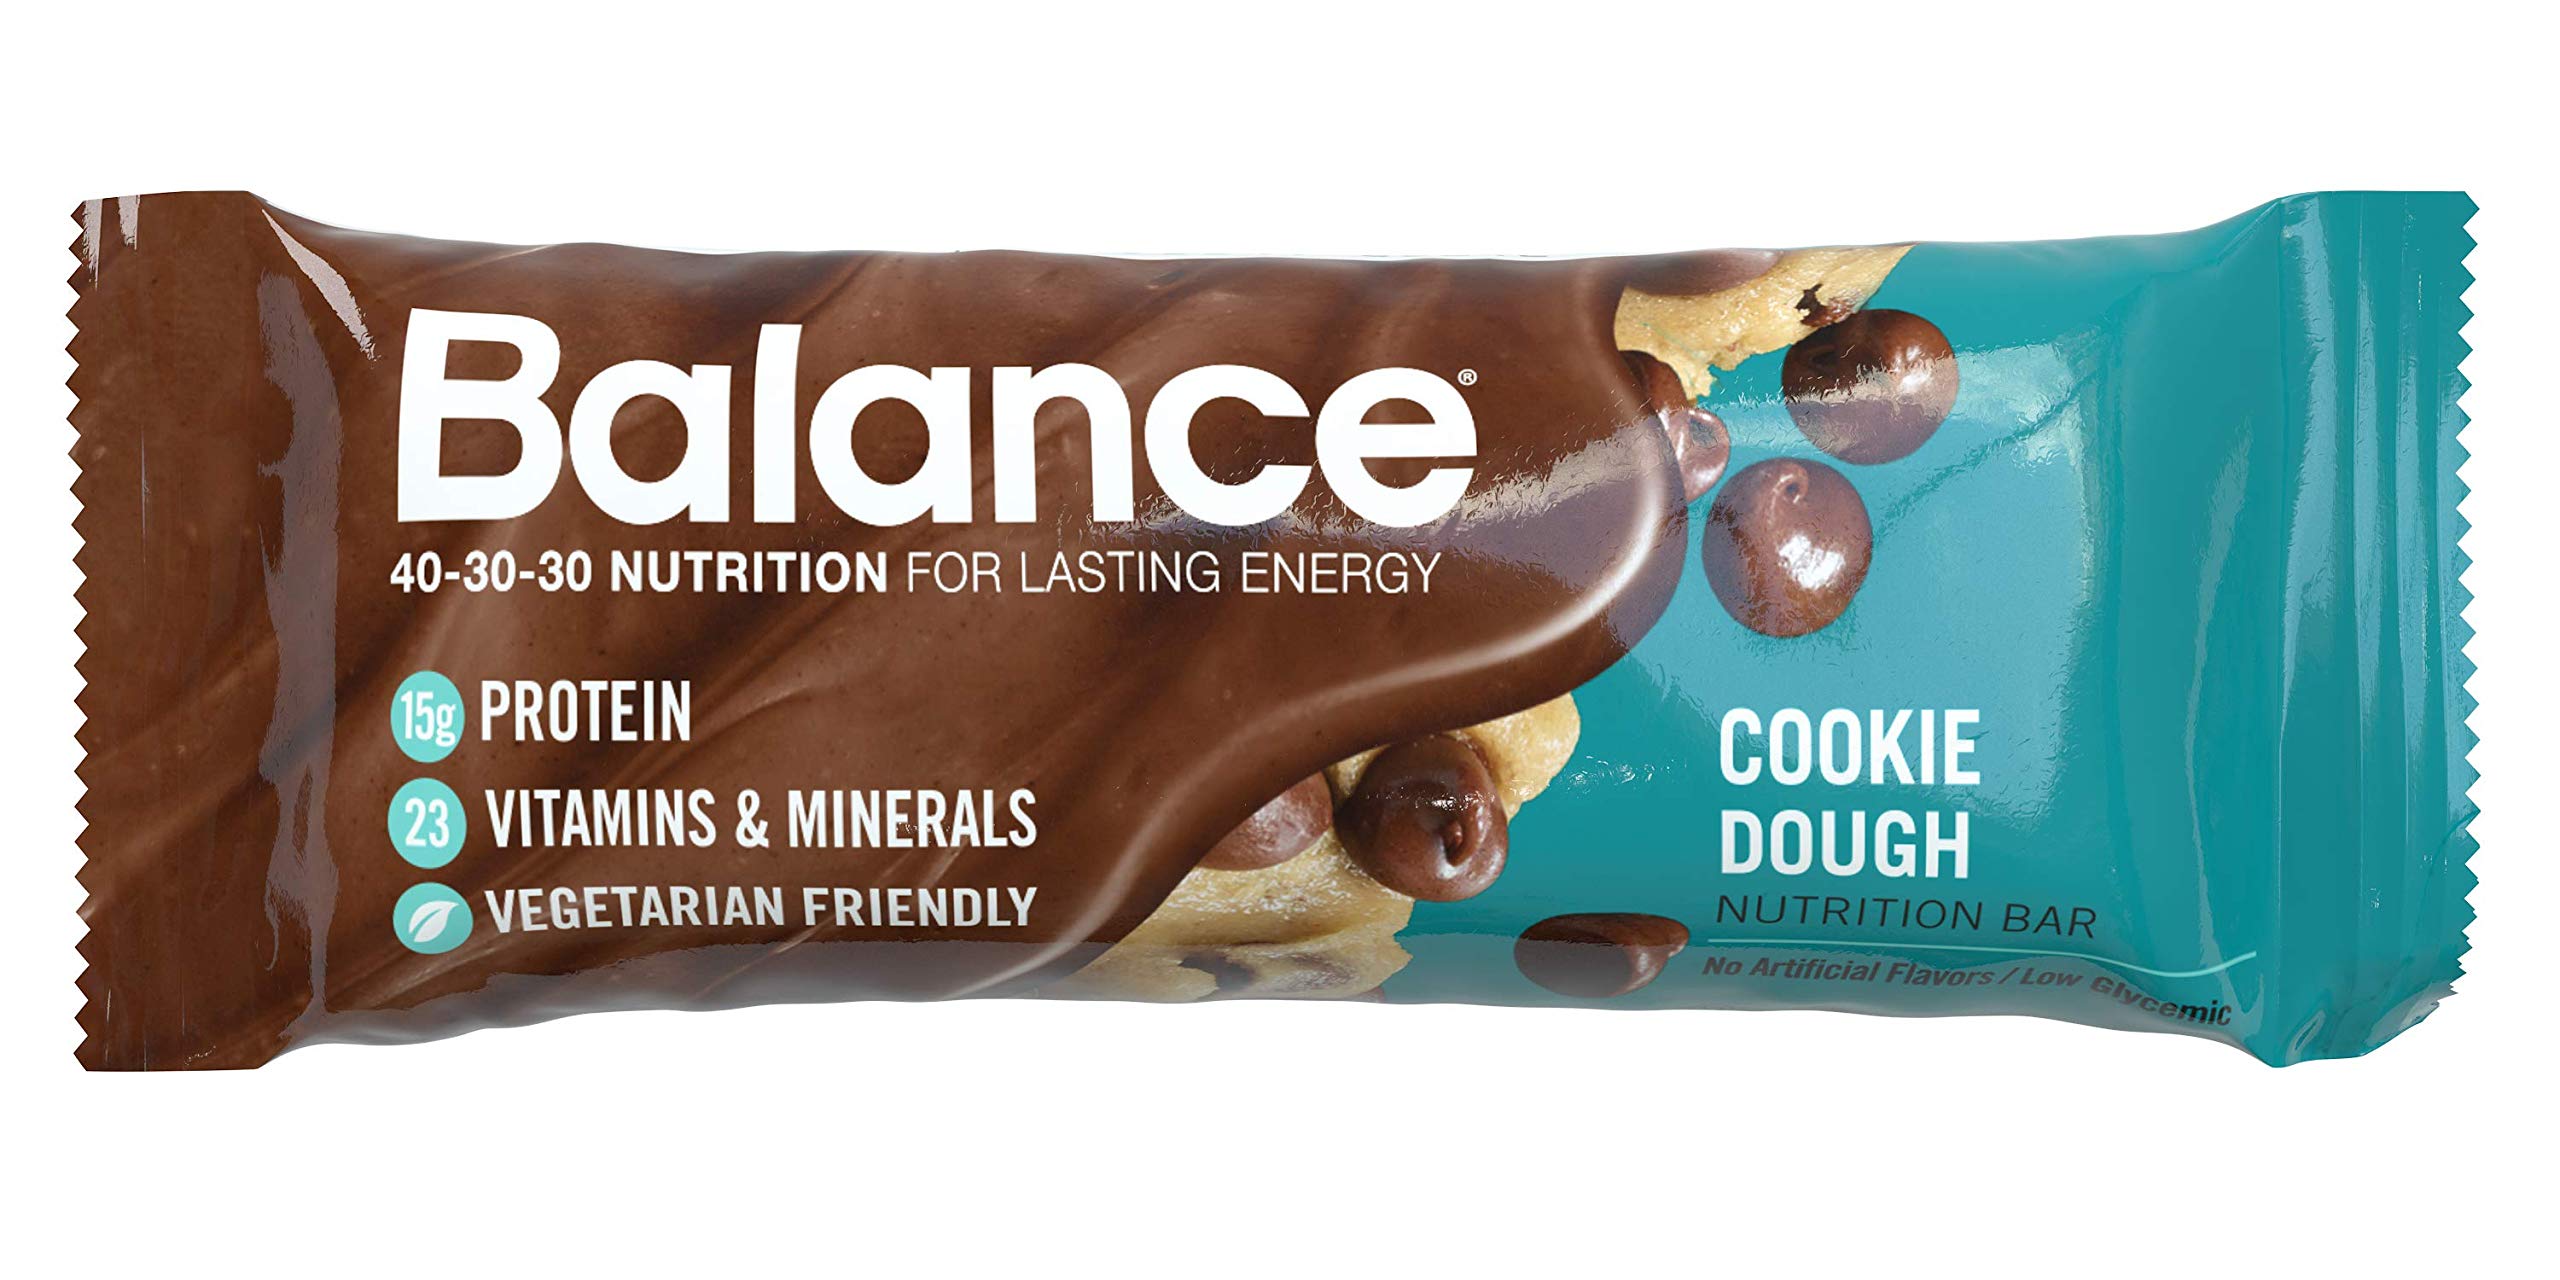 Balance Bar, Healthy Protein Snacks, Cookie Dough 6 Count $4.03 or less w/ S&S at Amazon